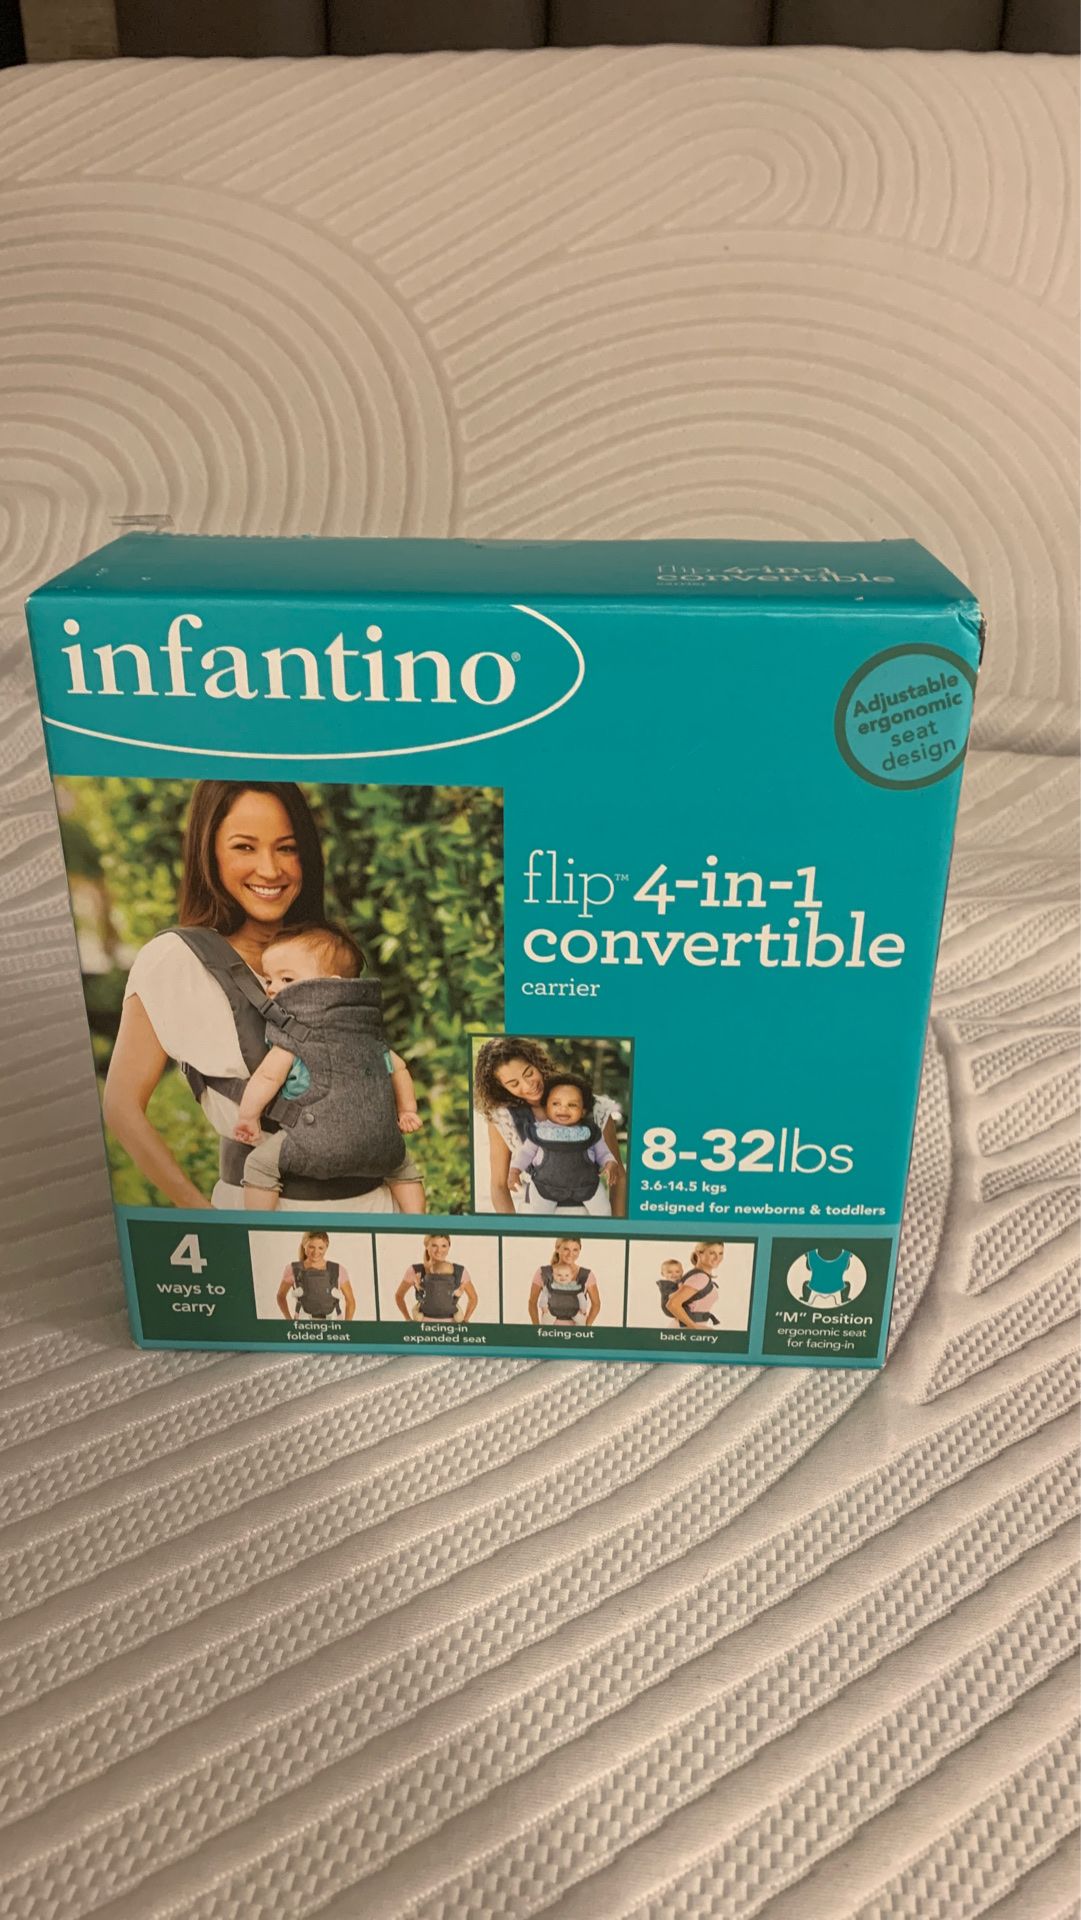 Infantino 4-in-1 convertible baby carrier